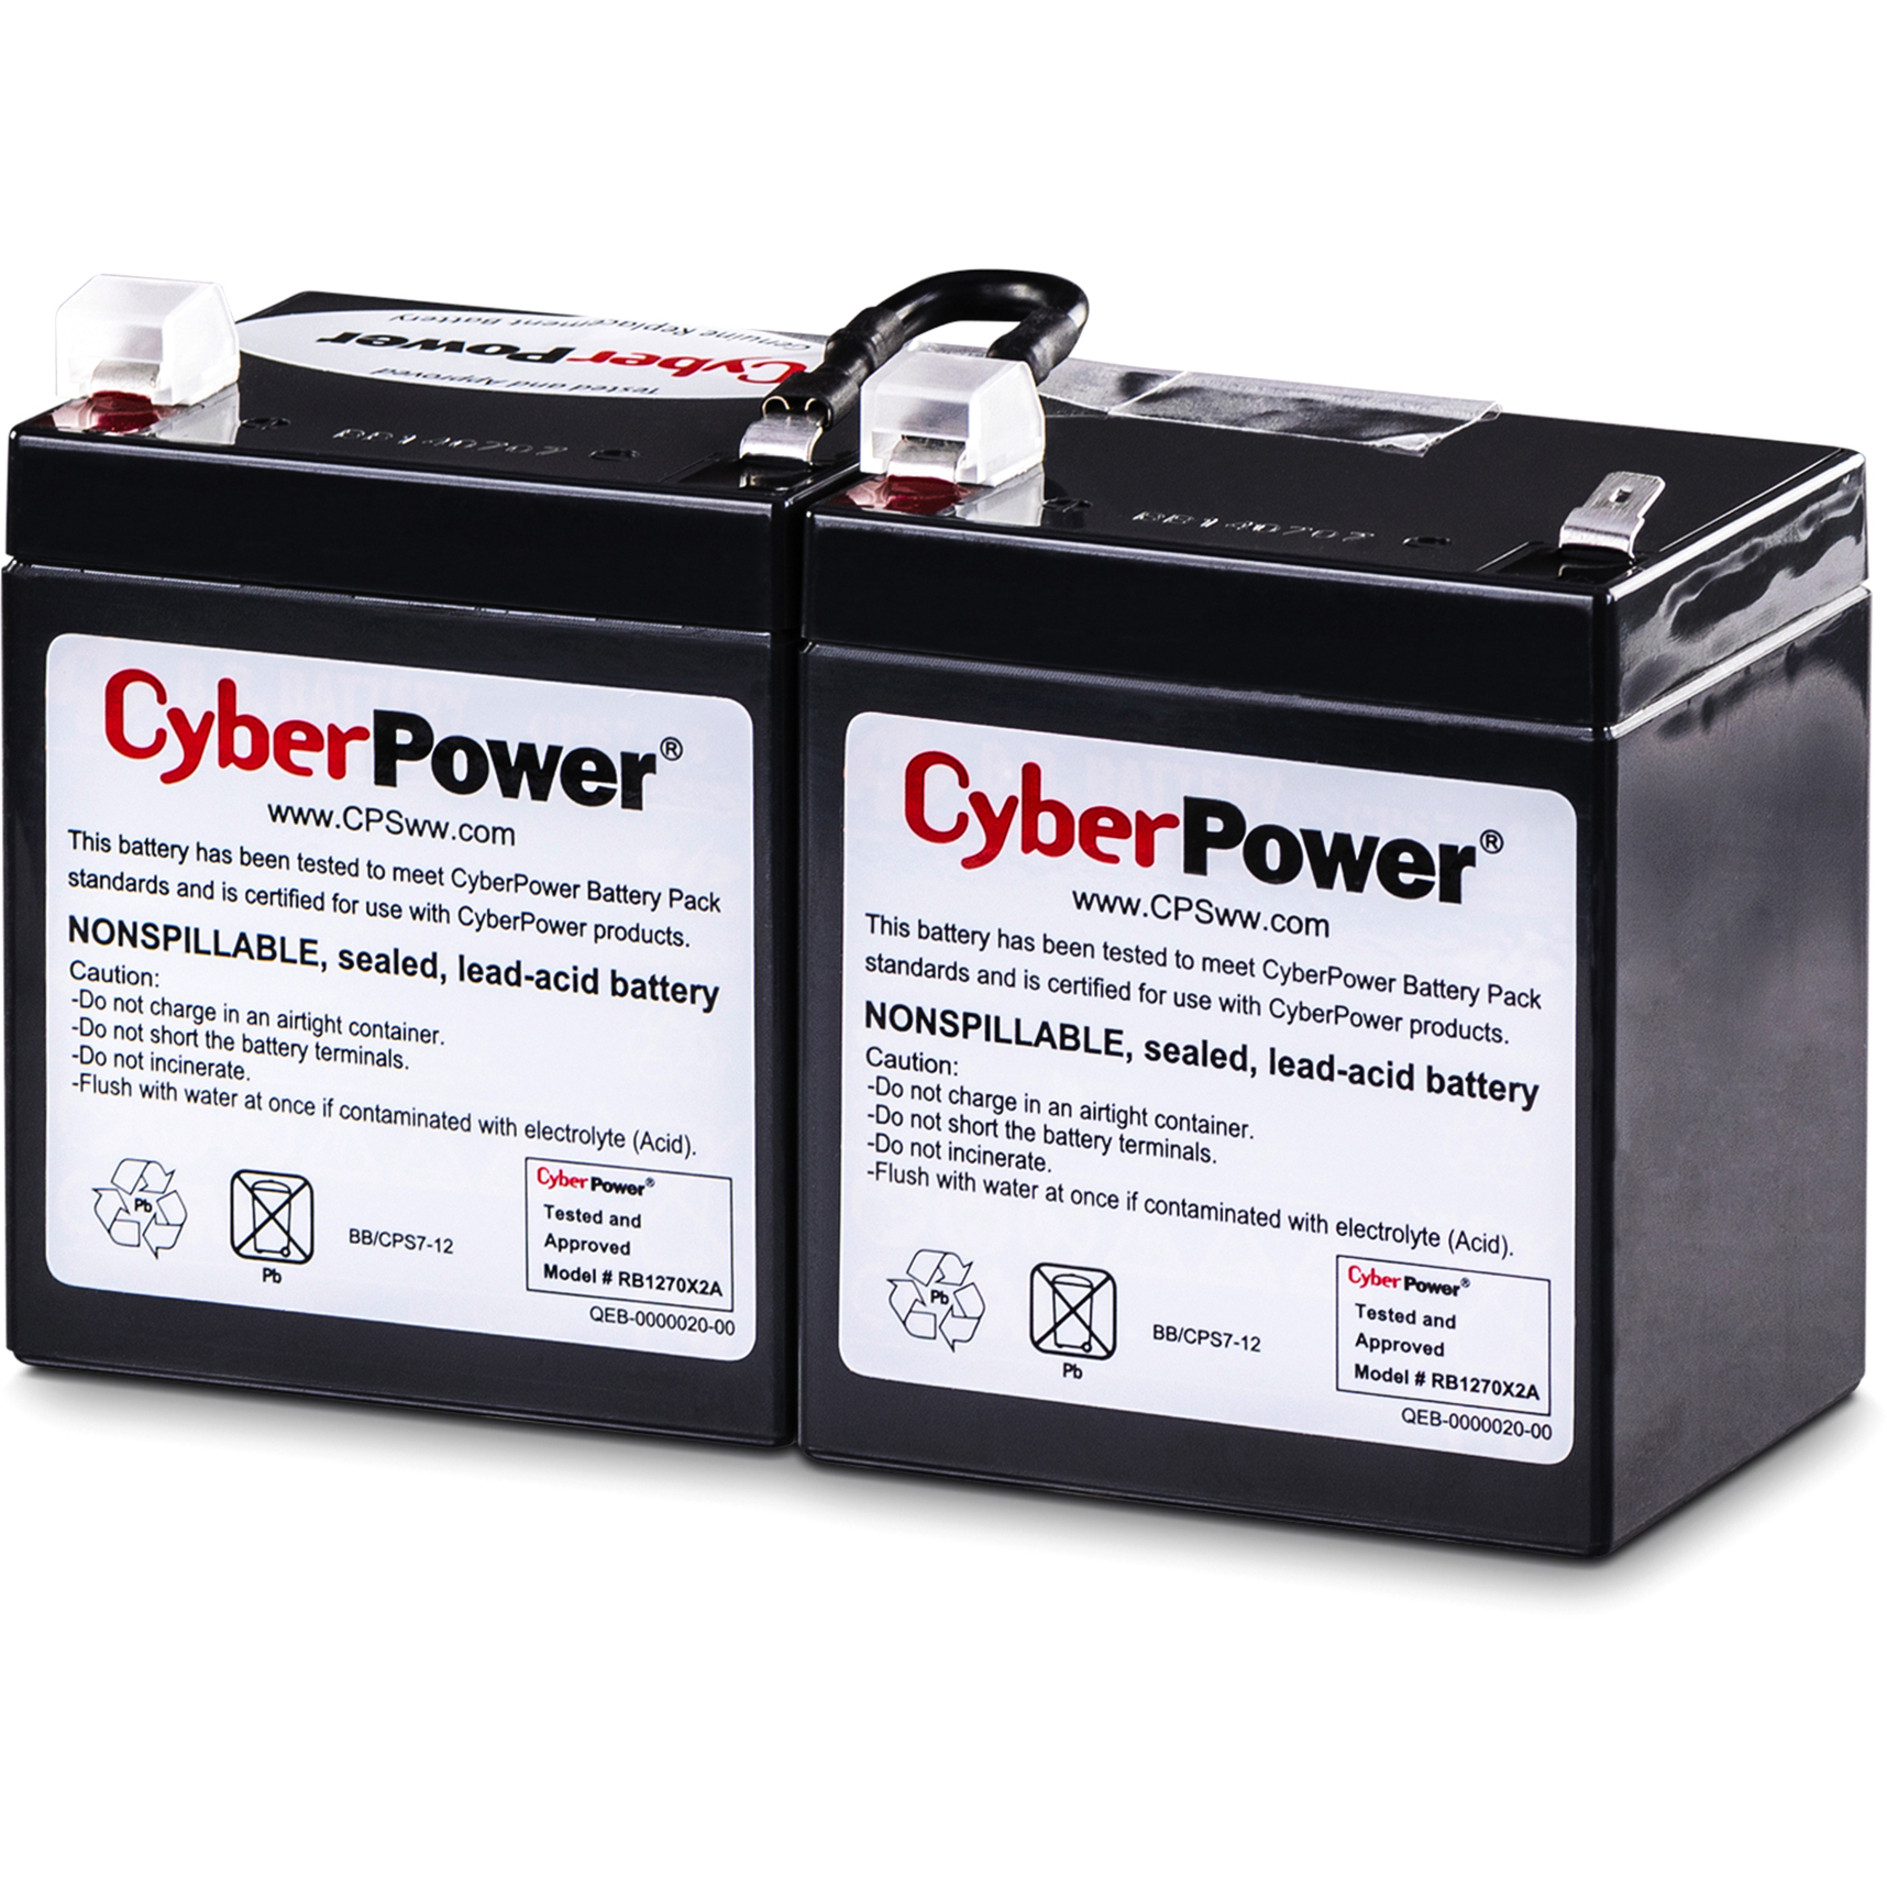 Cyber Power RB1270X2A Replacement Battery Cartridge2 X 12 V / 7 Ah Sealed Lead-Acid Battery, 18MO Warranty RB1270X2A